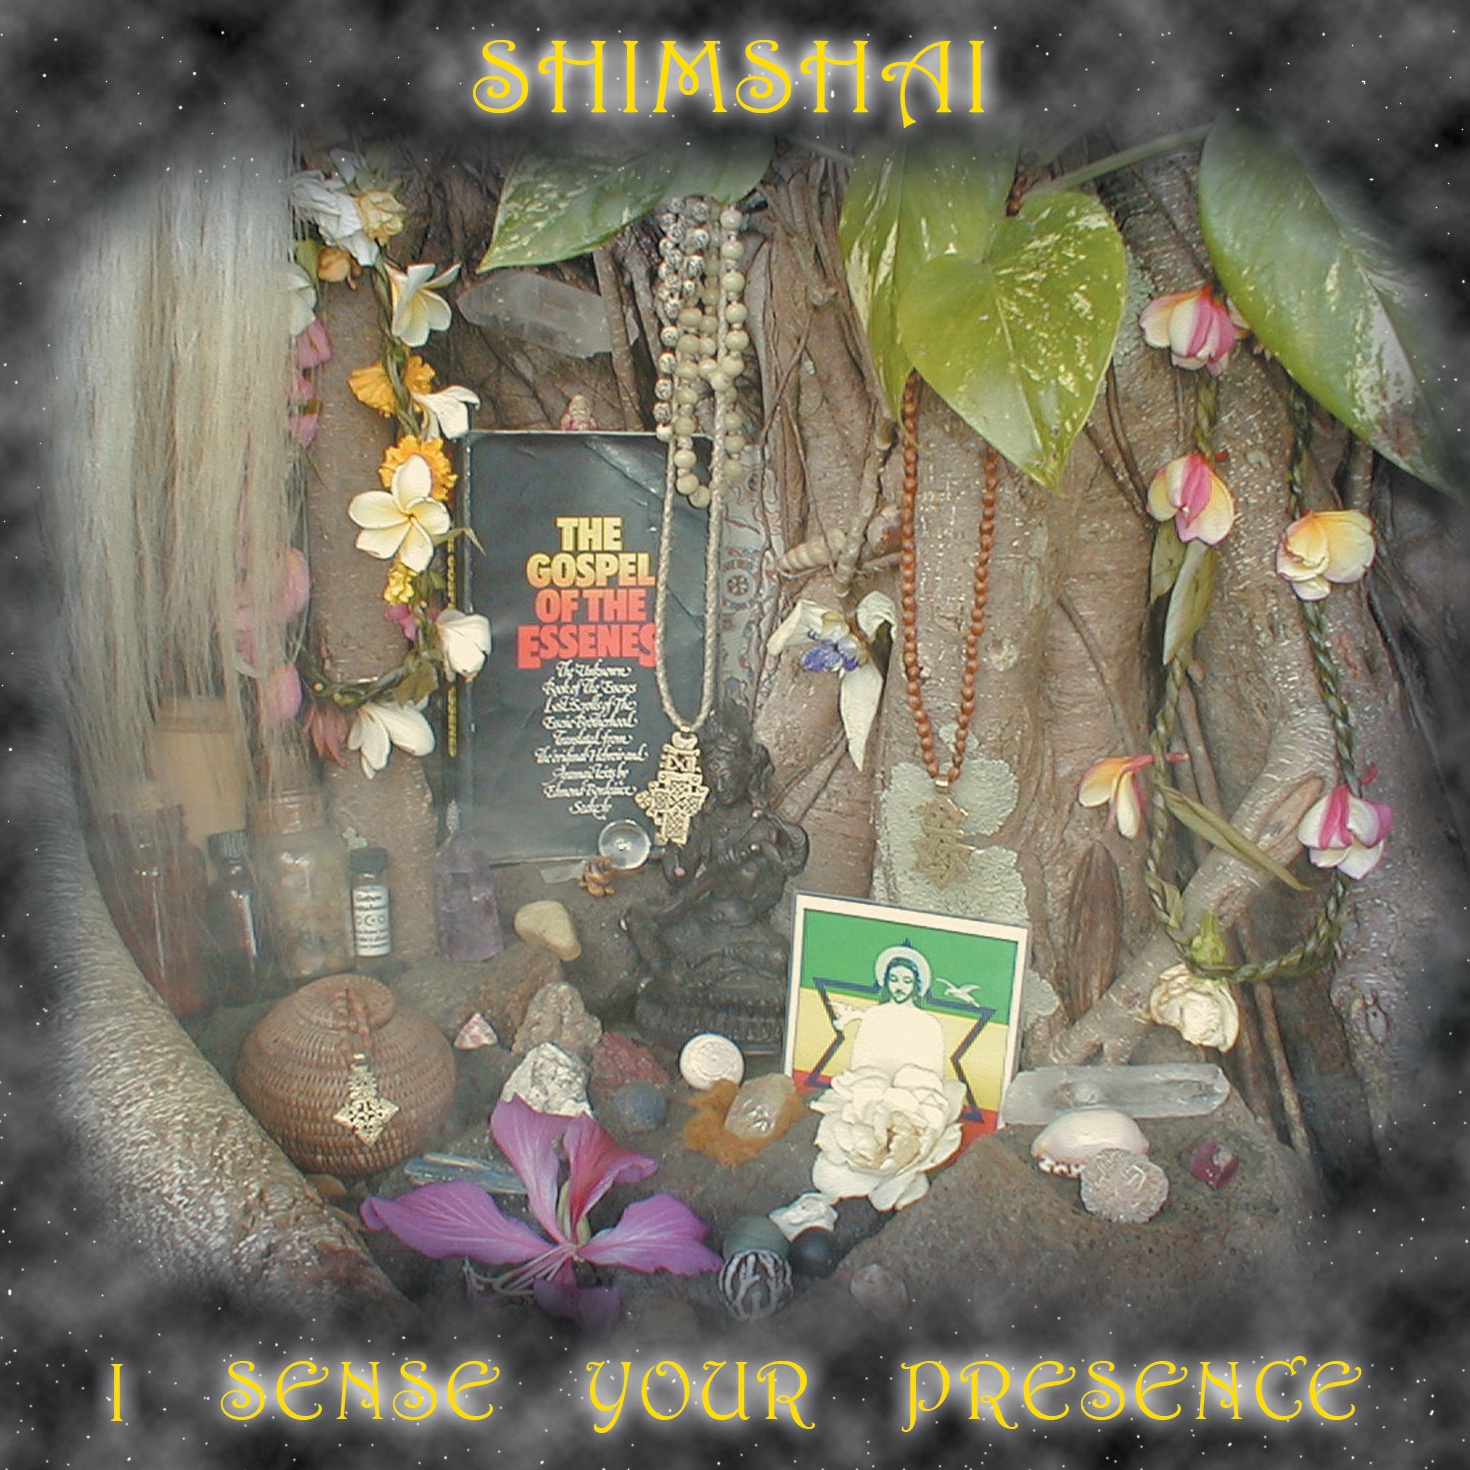 All That I Am by Shimshai from the album I Sense Your Presence, original spiritual folk anthems for this time